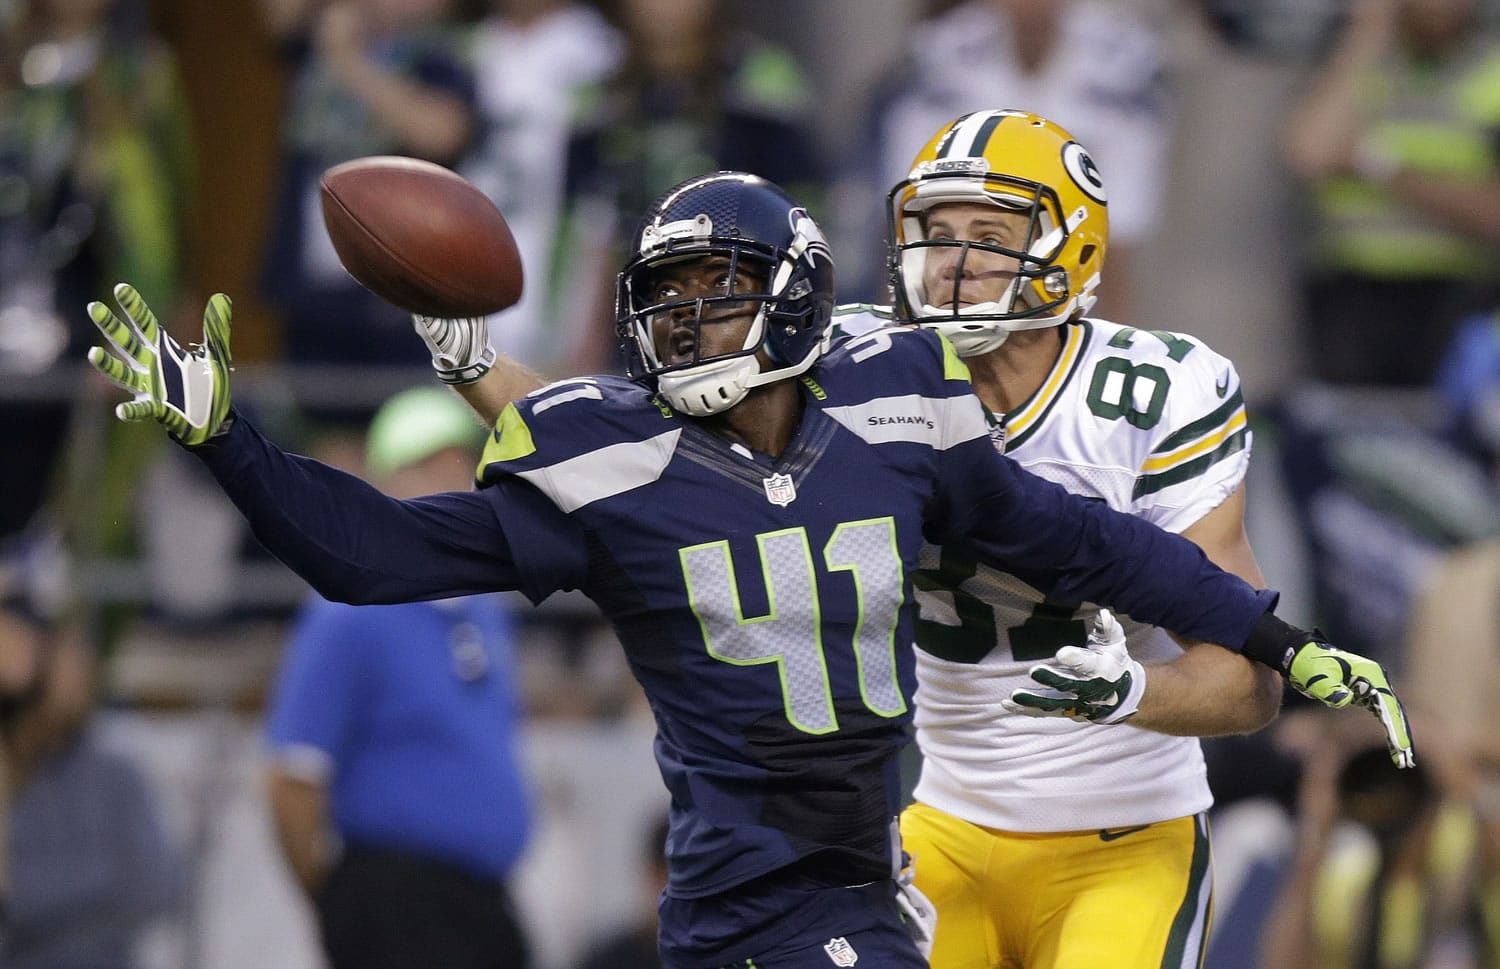 Seattle Seahawks cornerback Byron Maxwell (41) breaks up a pass intended for Green Bay Packers wide receiver Jordy Nelson (87) during the game on Thursday, Sept. 4, 2014, in Seattle.